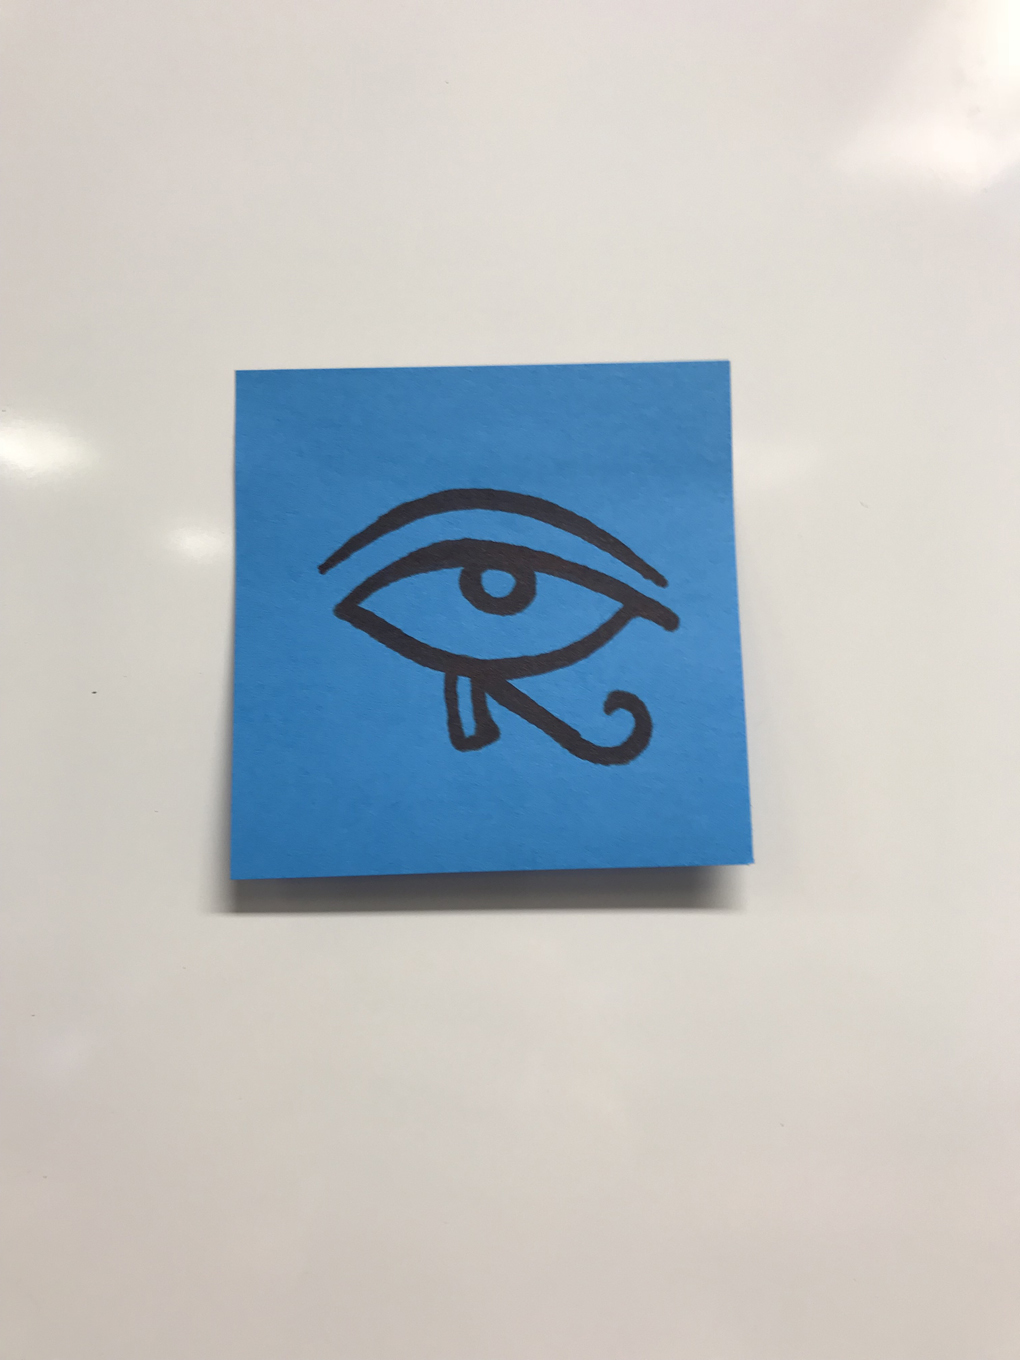 the eye of horus drawn on a postit note